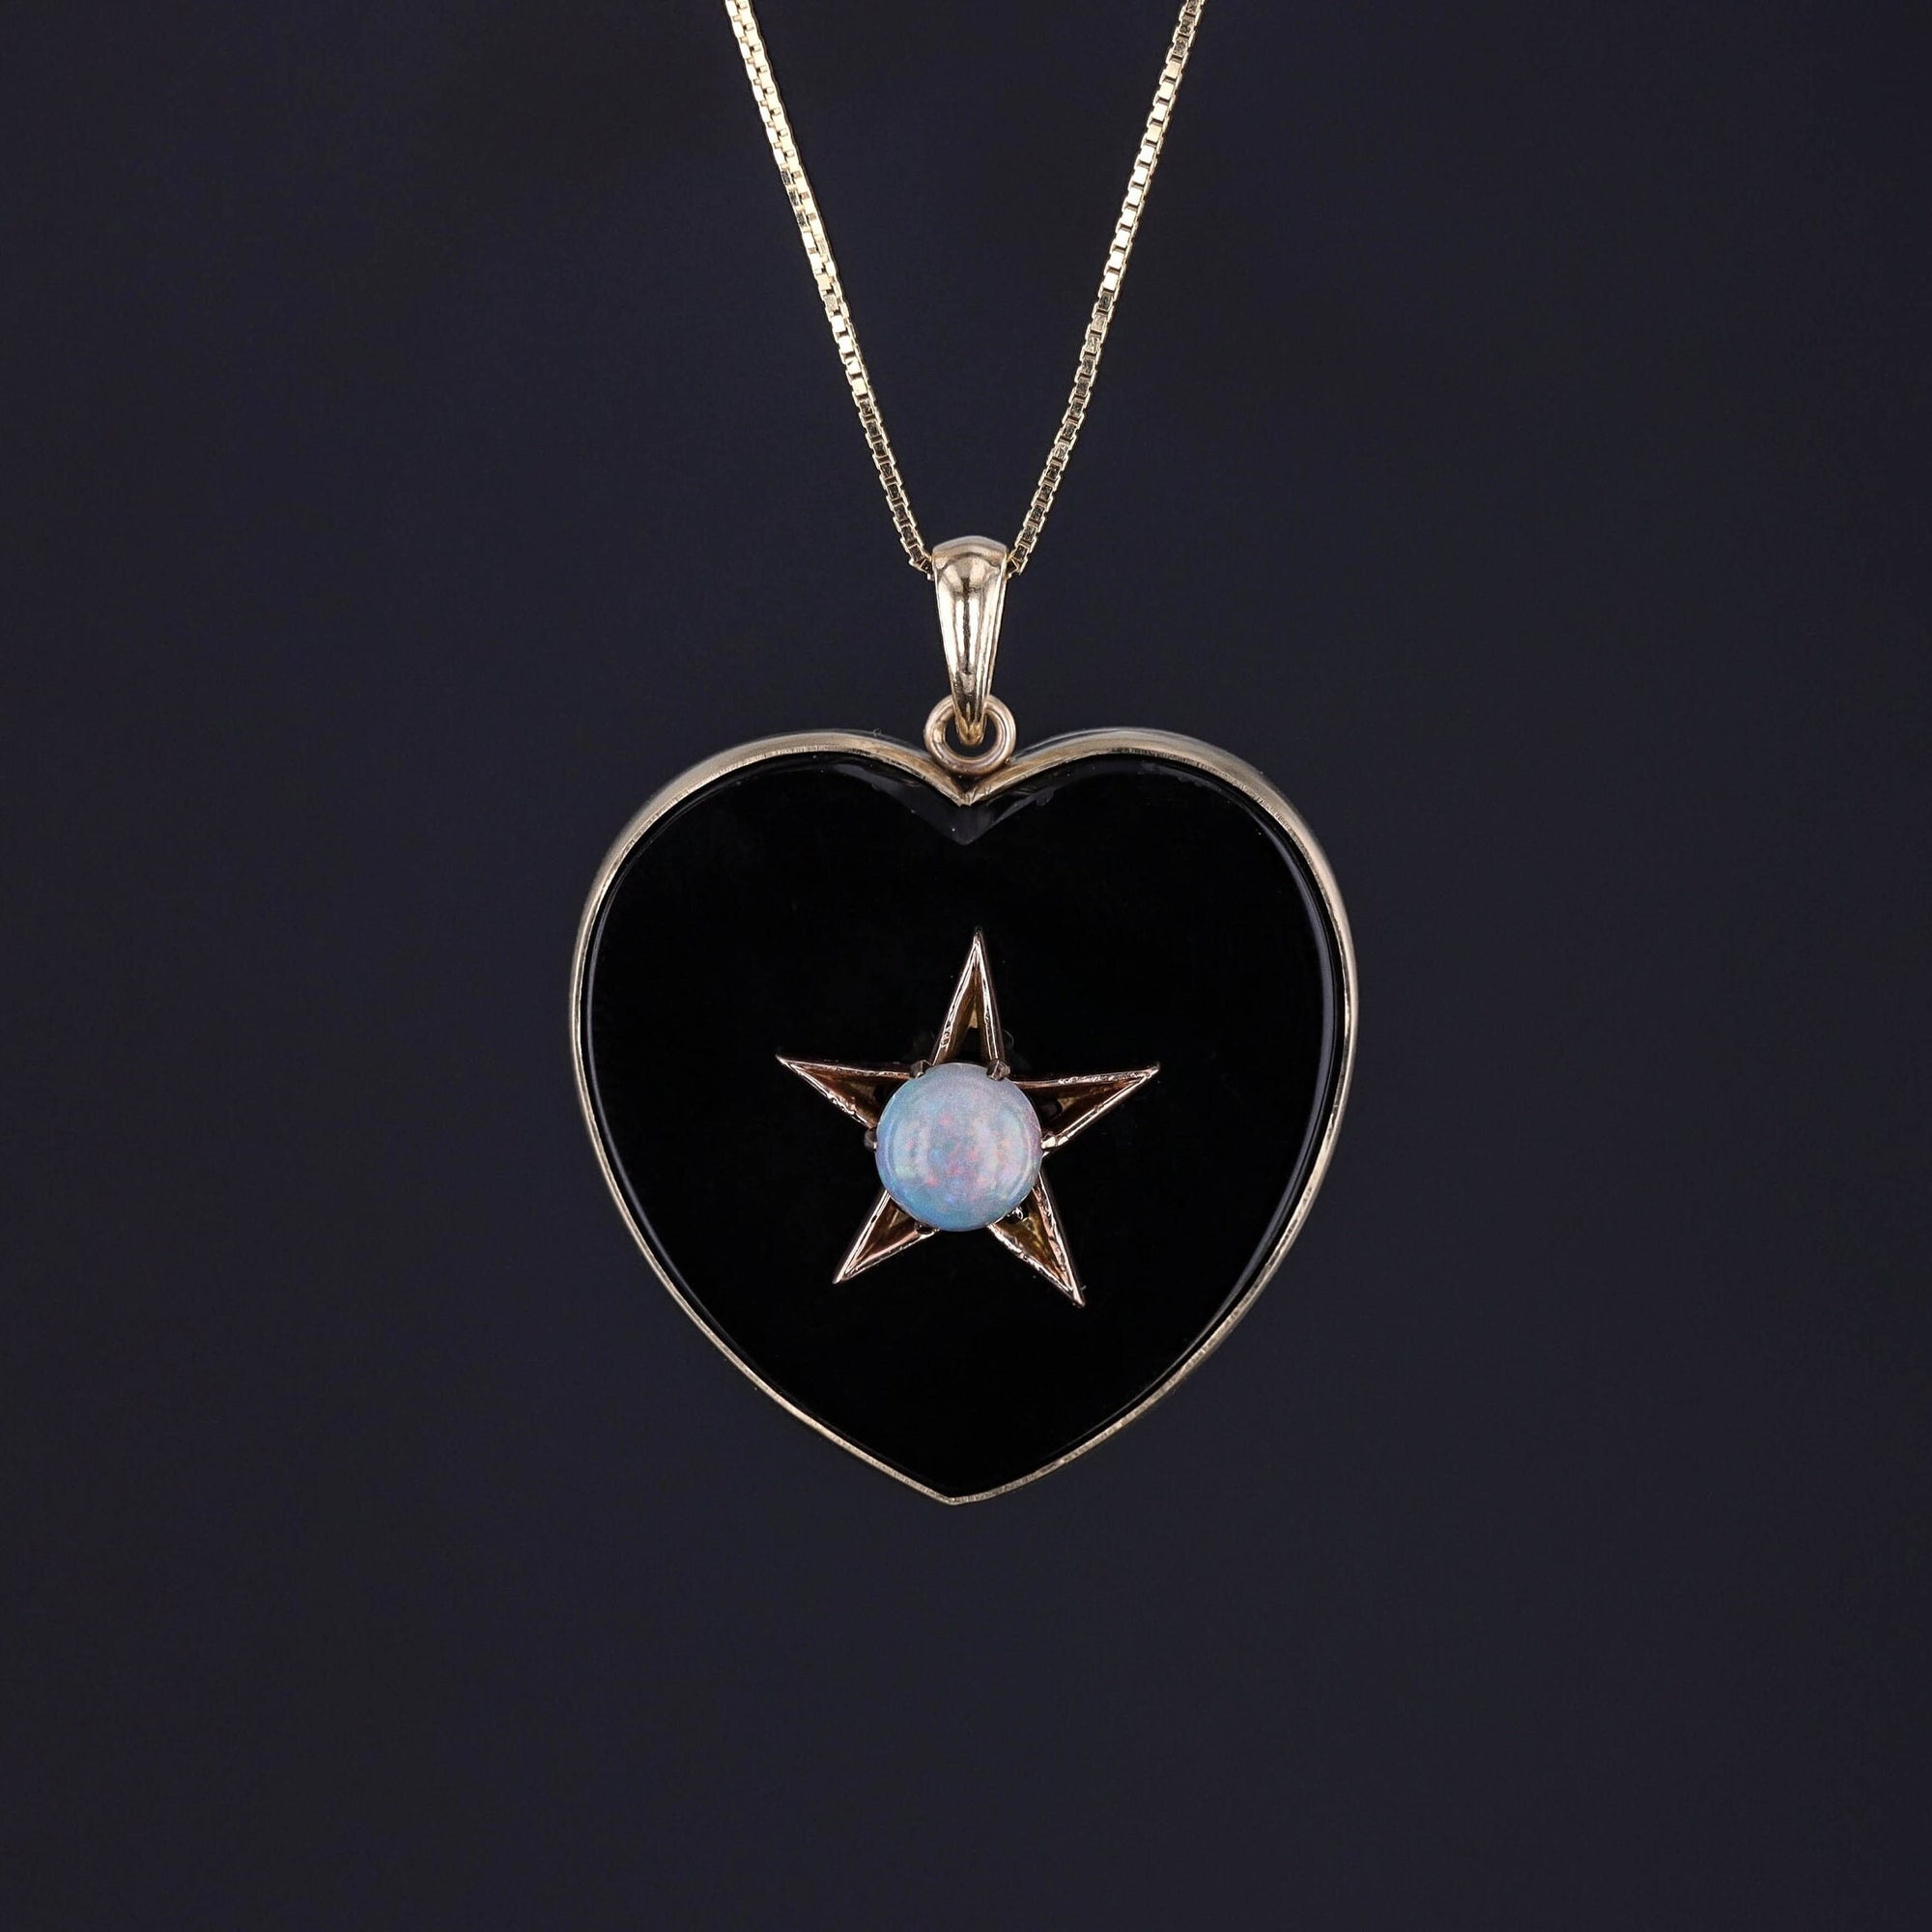 Onyx and Opal Heart Conversion Pendant of 14k Gold